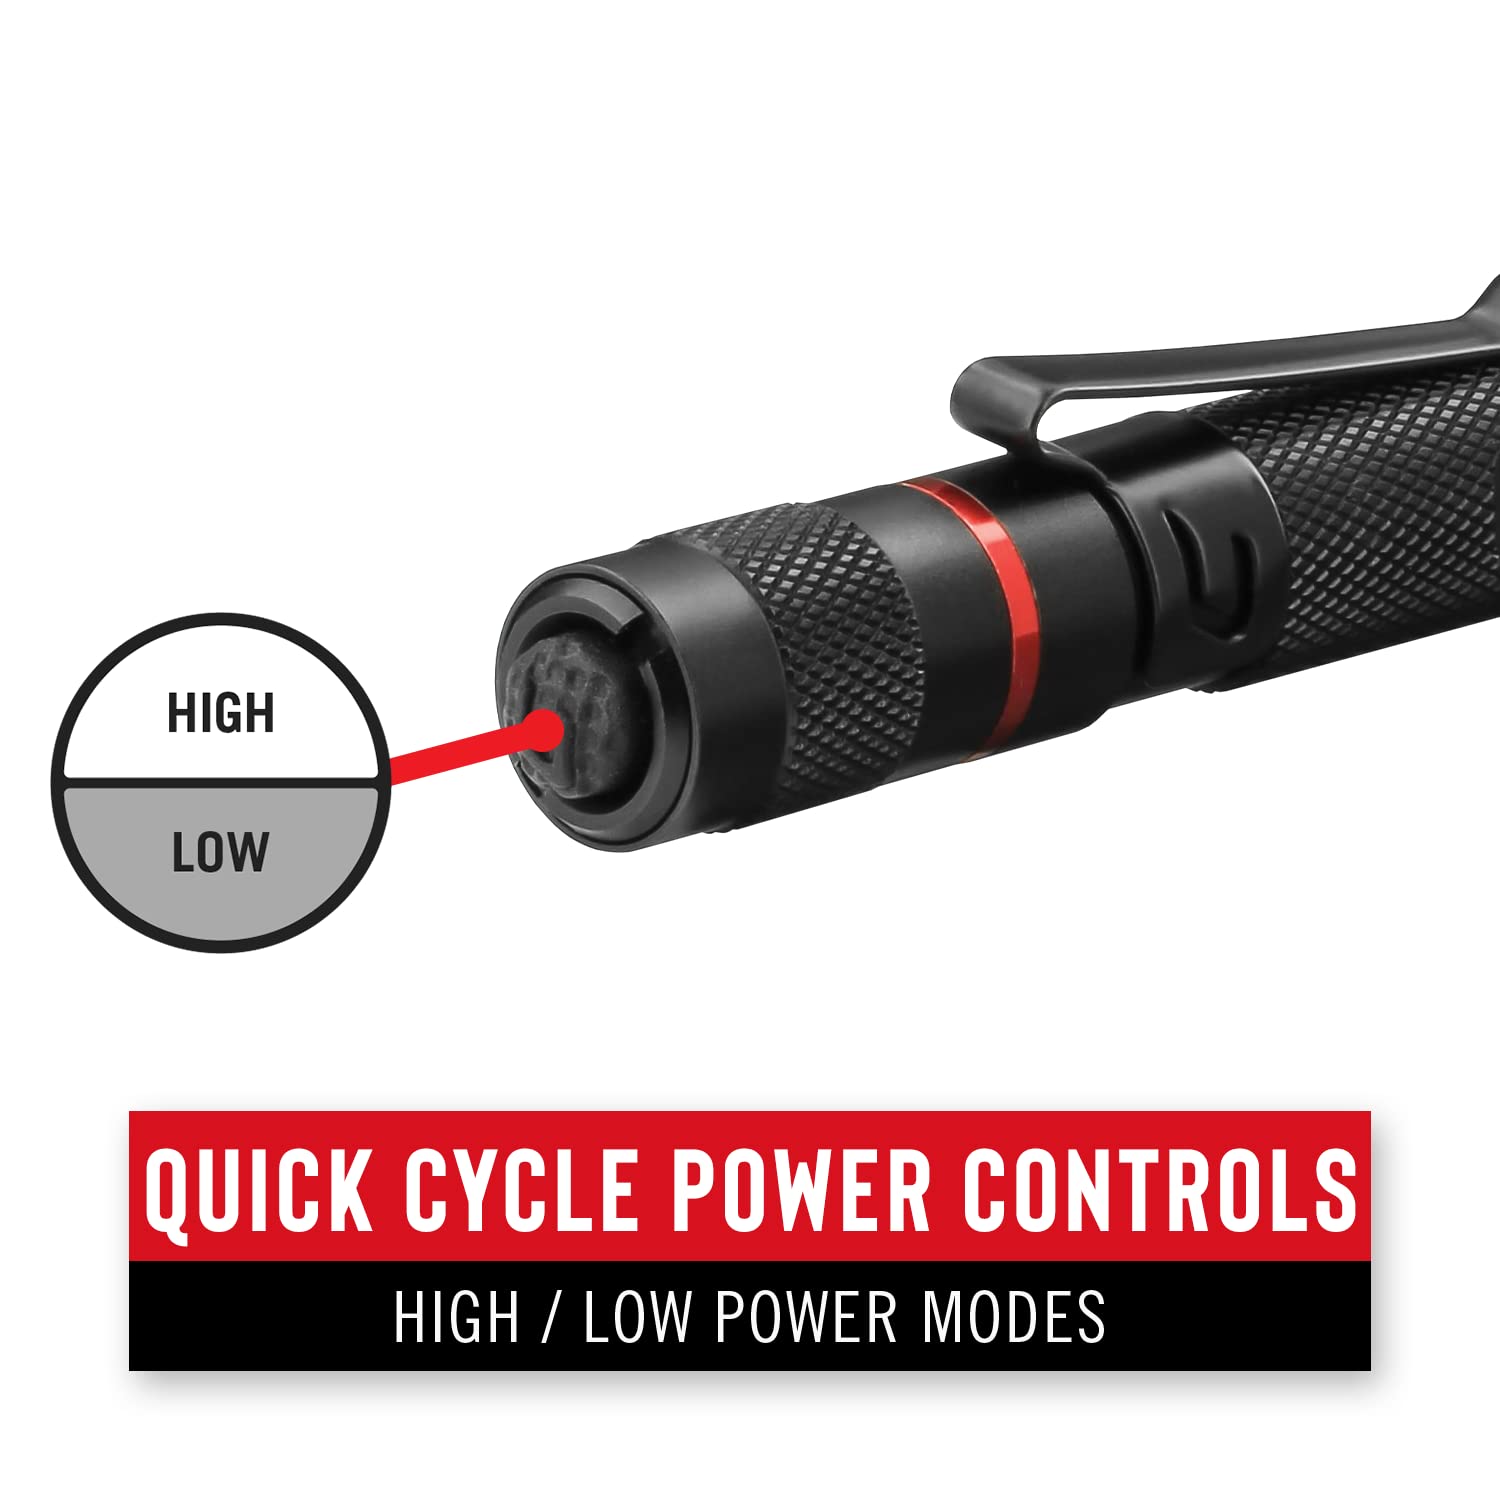 Coast HP3R 385 Lumen Rechargeable LED Penlight with Twist Focus, Red